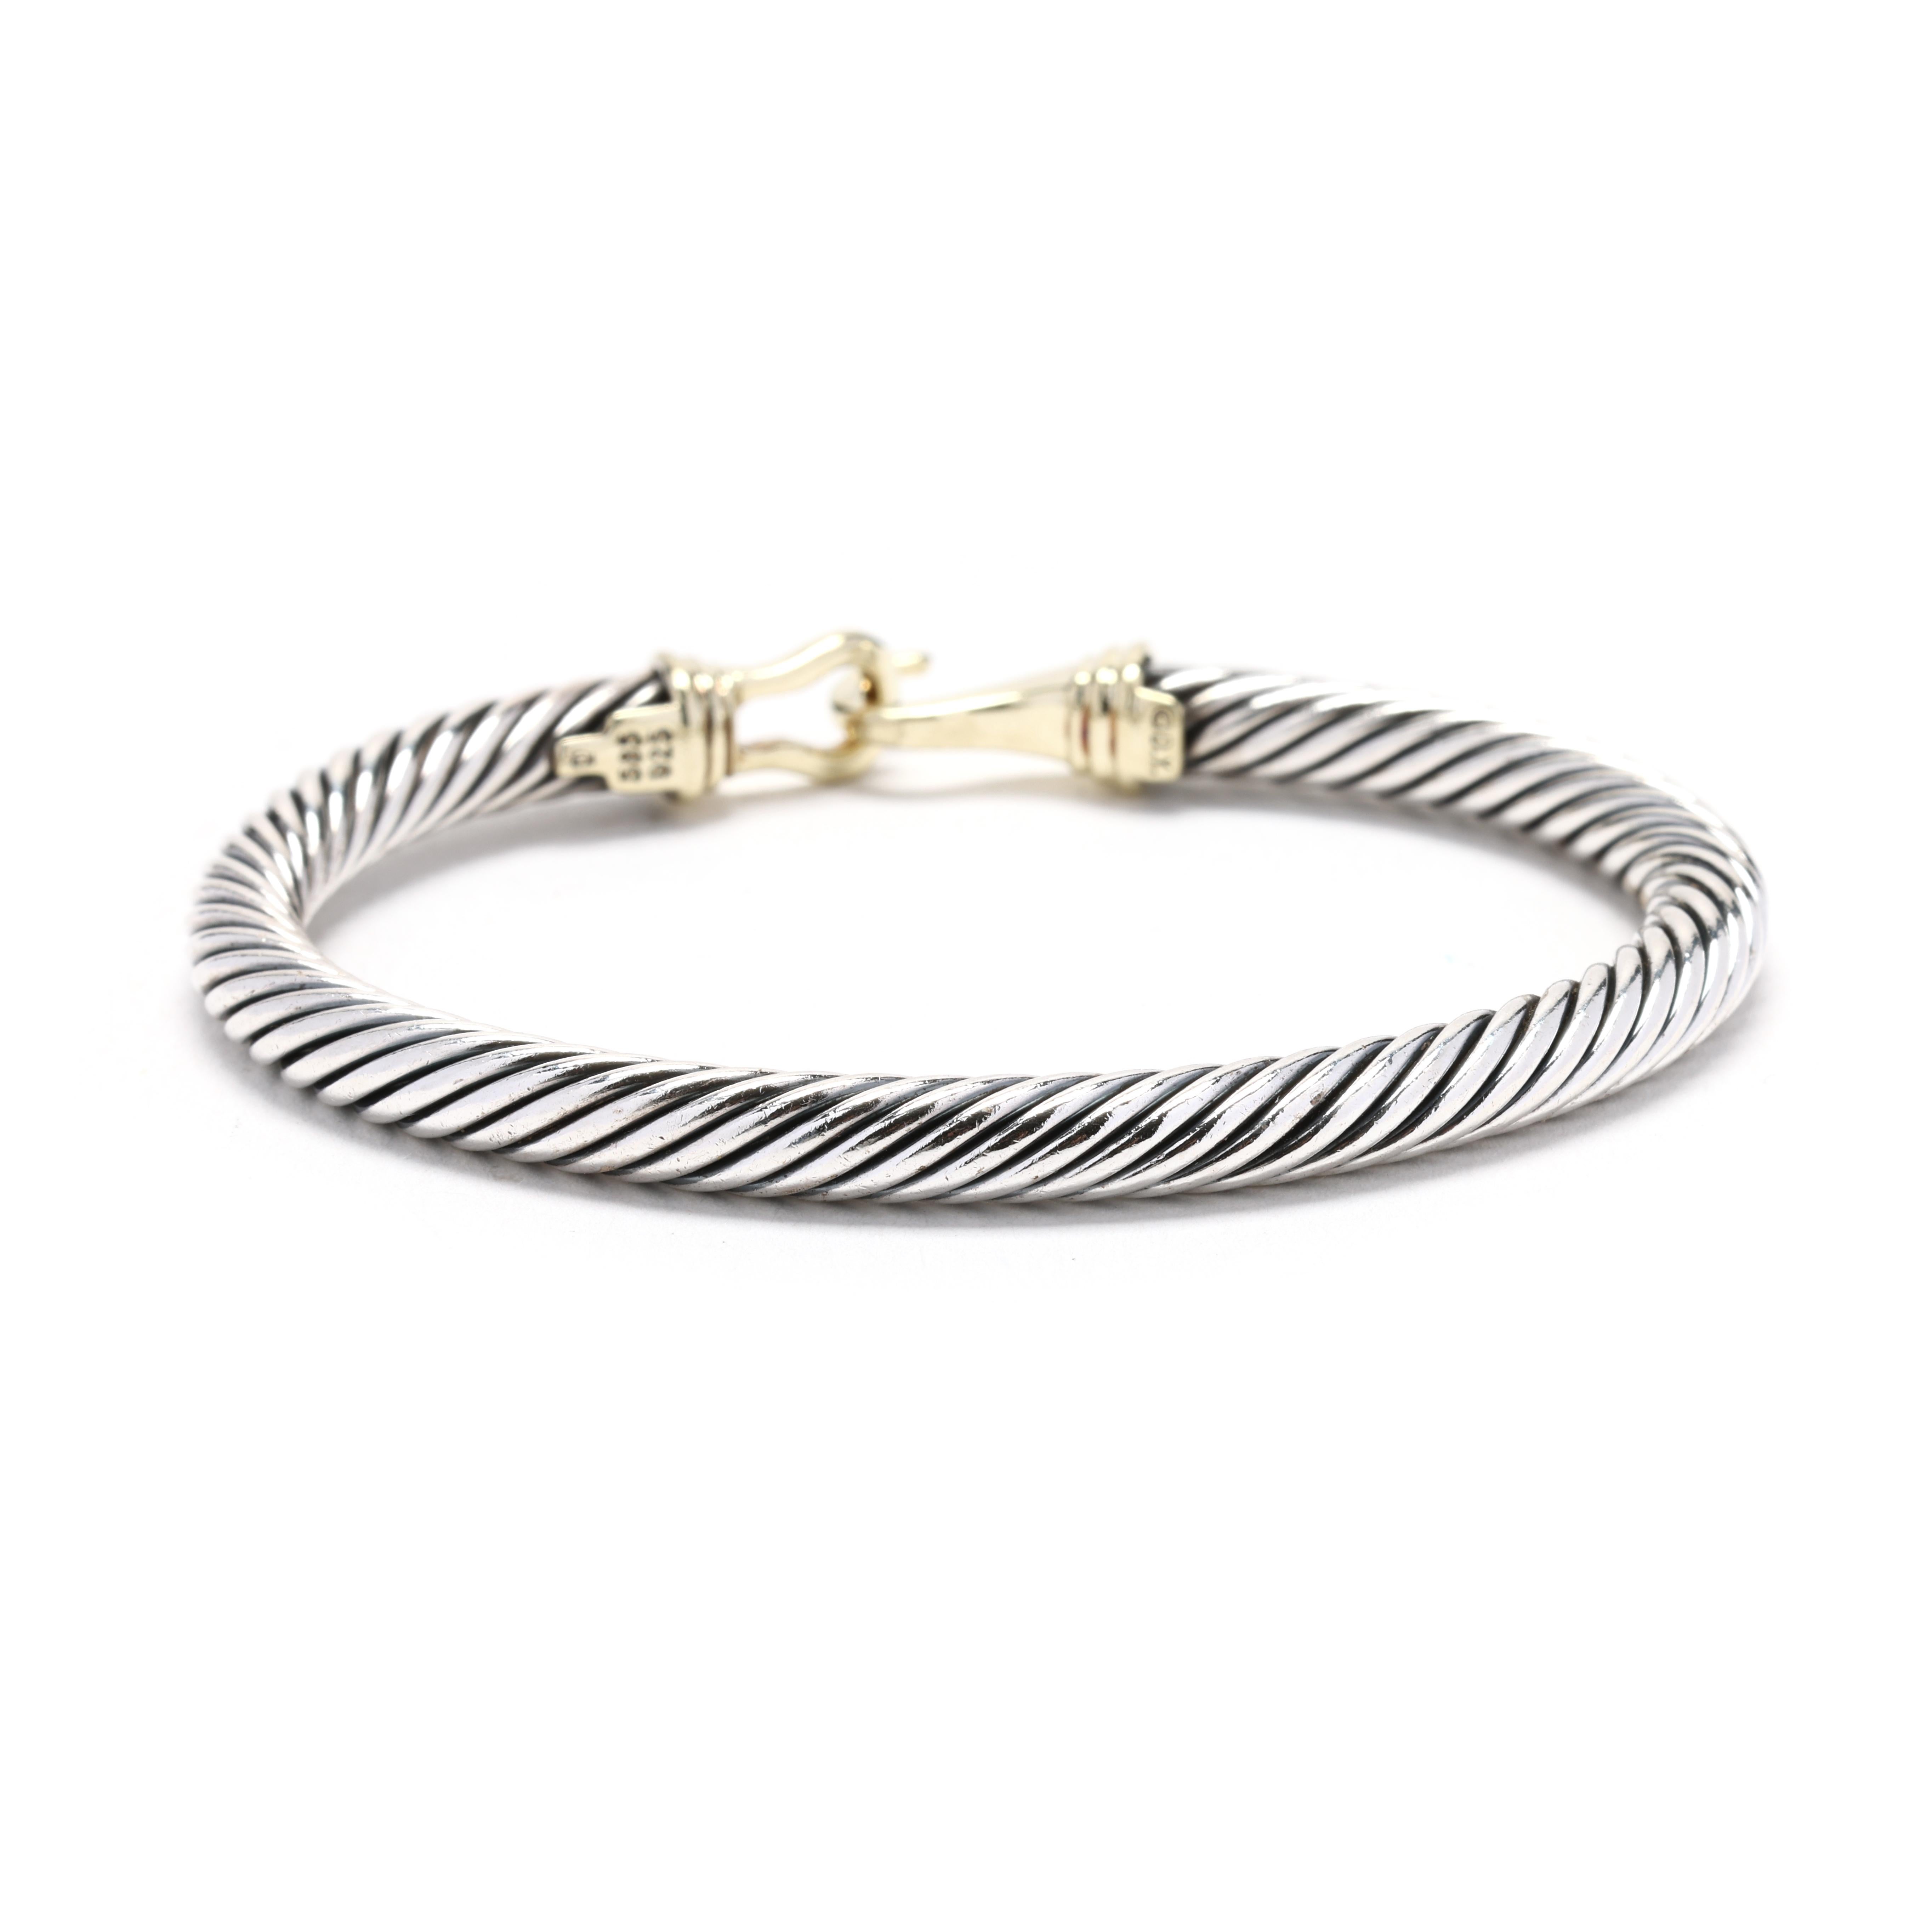 This stunning David Yurman buckle cuff bracelet is a true statement piece. Crafted from sterling silver and featuring a 14k yellow gold buckle detail, this bracelet is a perfect blend of classic and modern elements. The twisted cable motif, which is